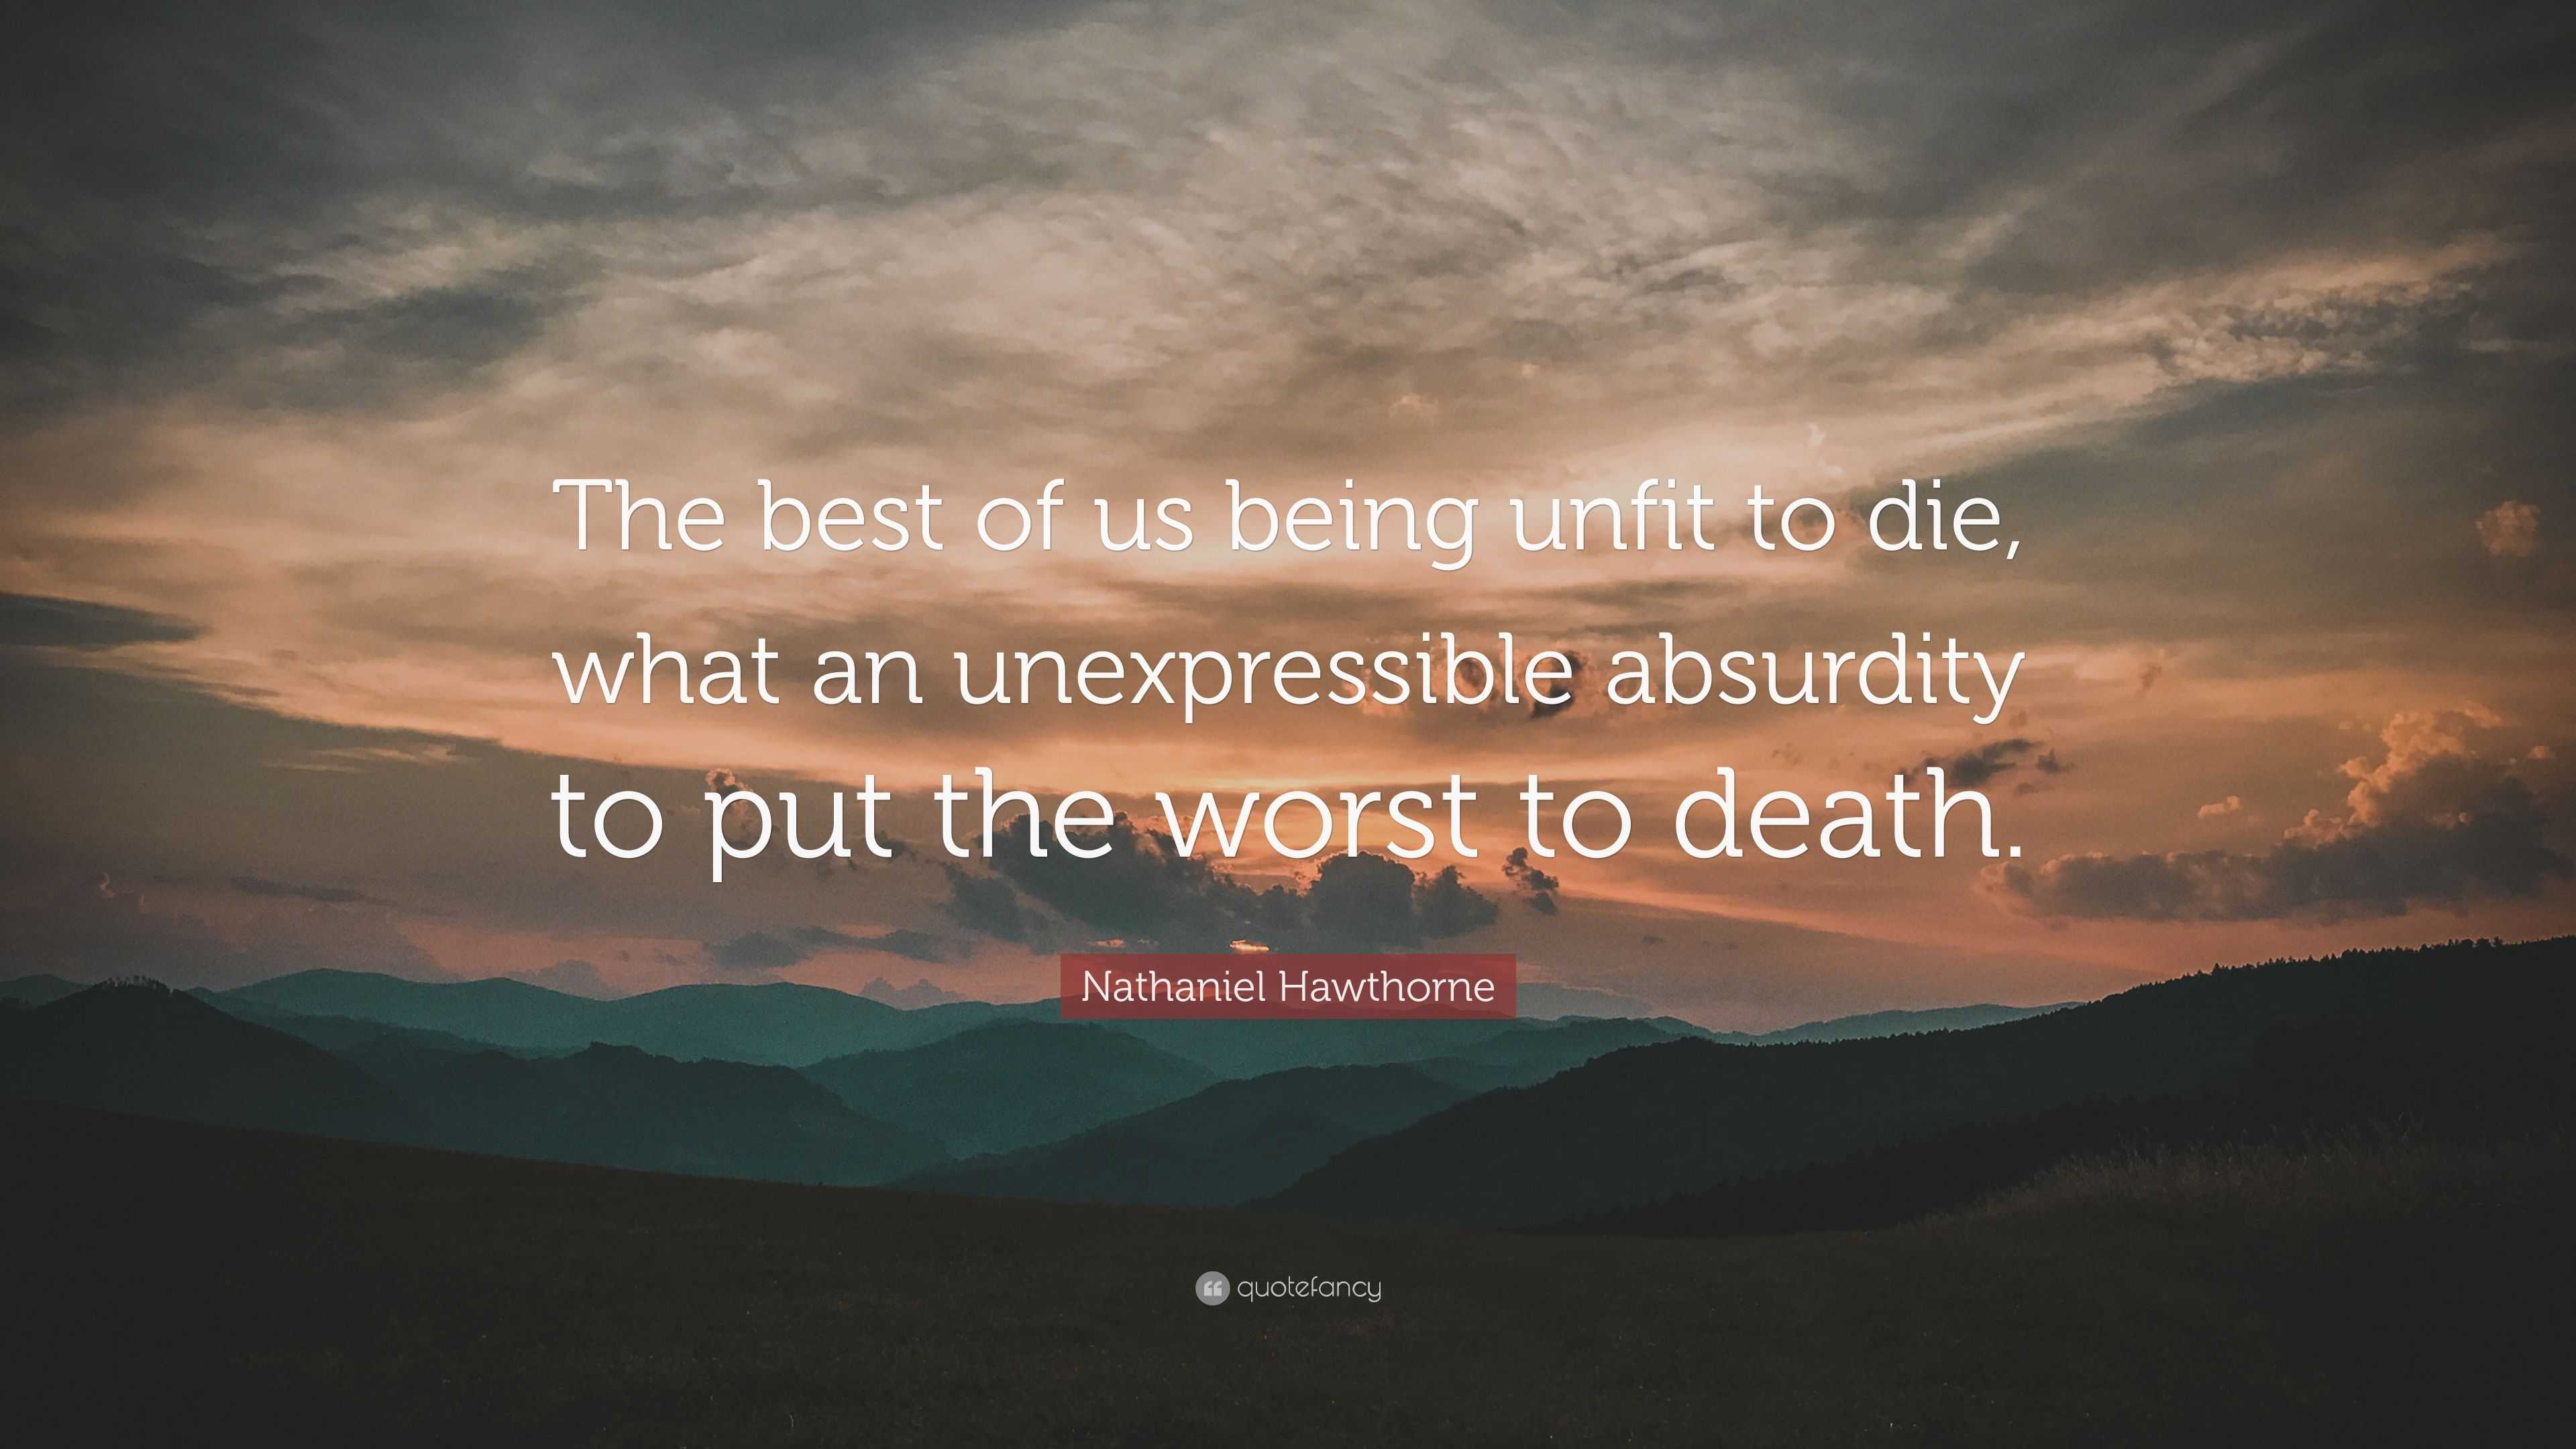 Nathaniel Hawthorne Quote: “The best of us being unfit to die, what an ...